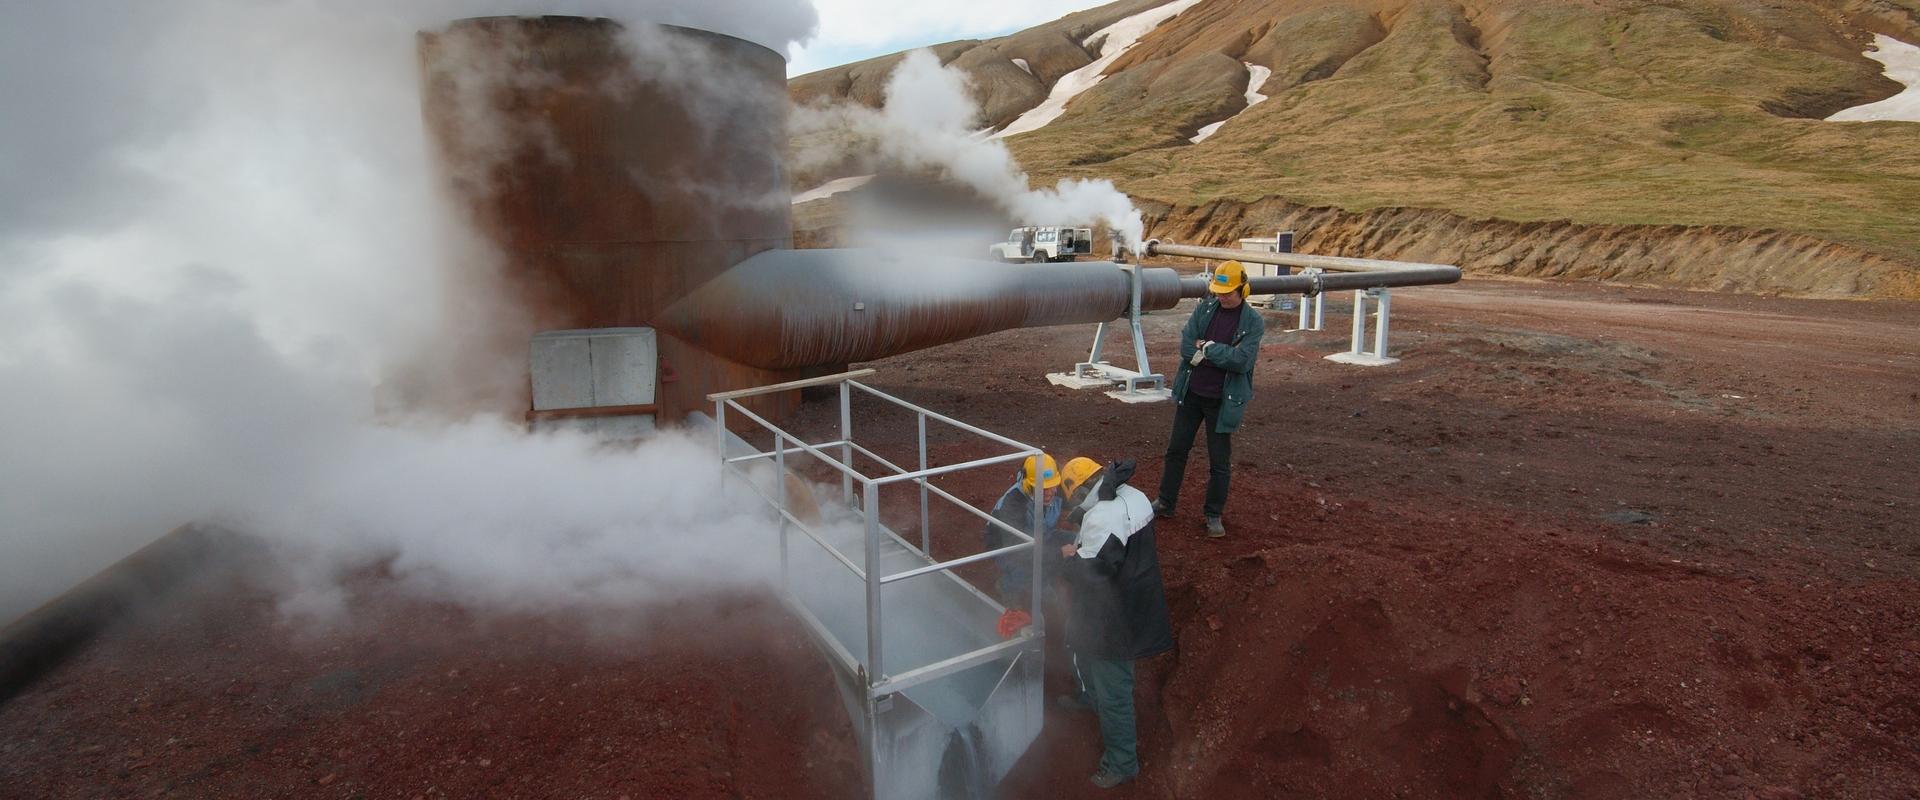 Sampling operation at a geothermal well, Iceland